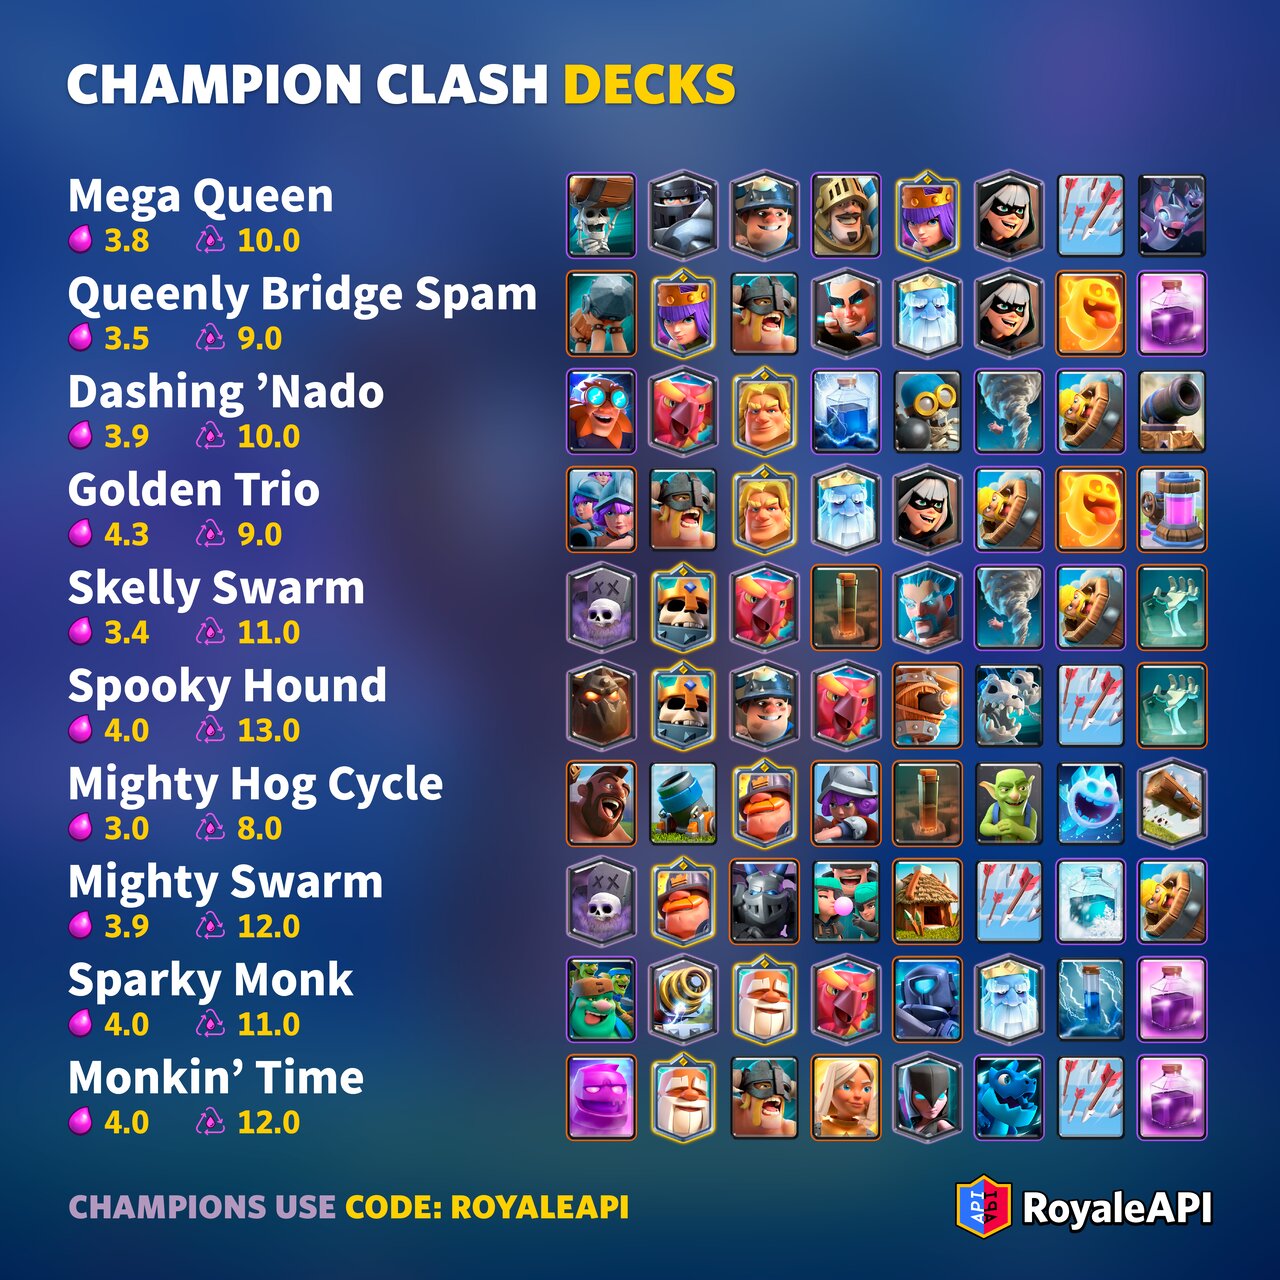 What are Decks in Clash Royale?